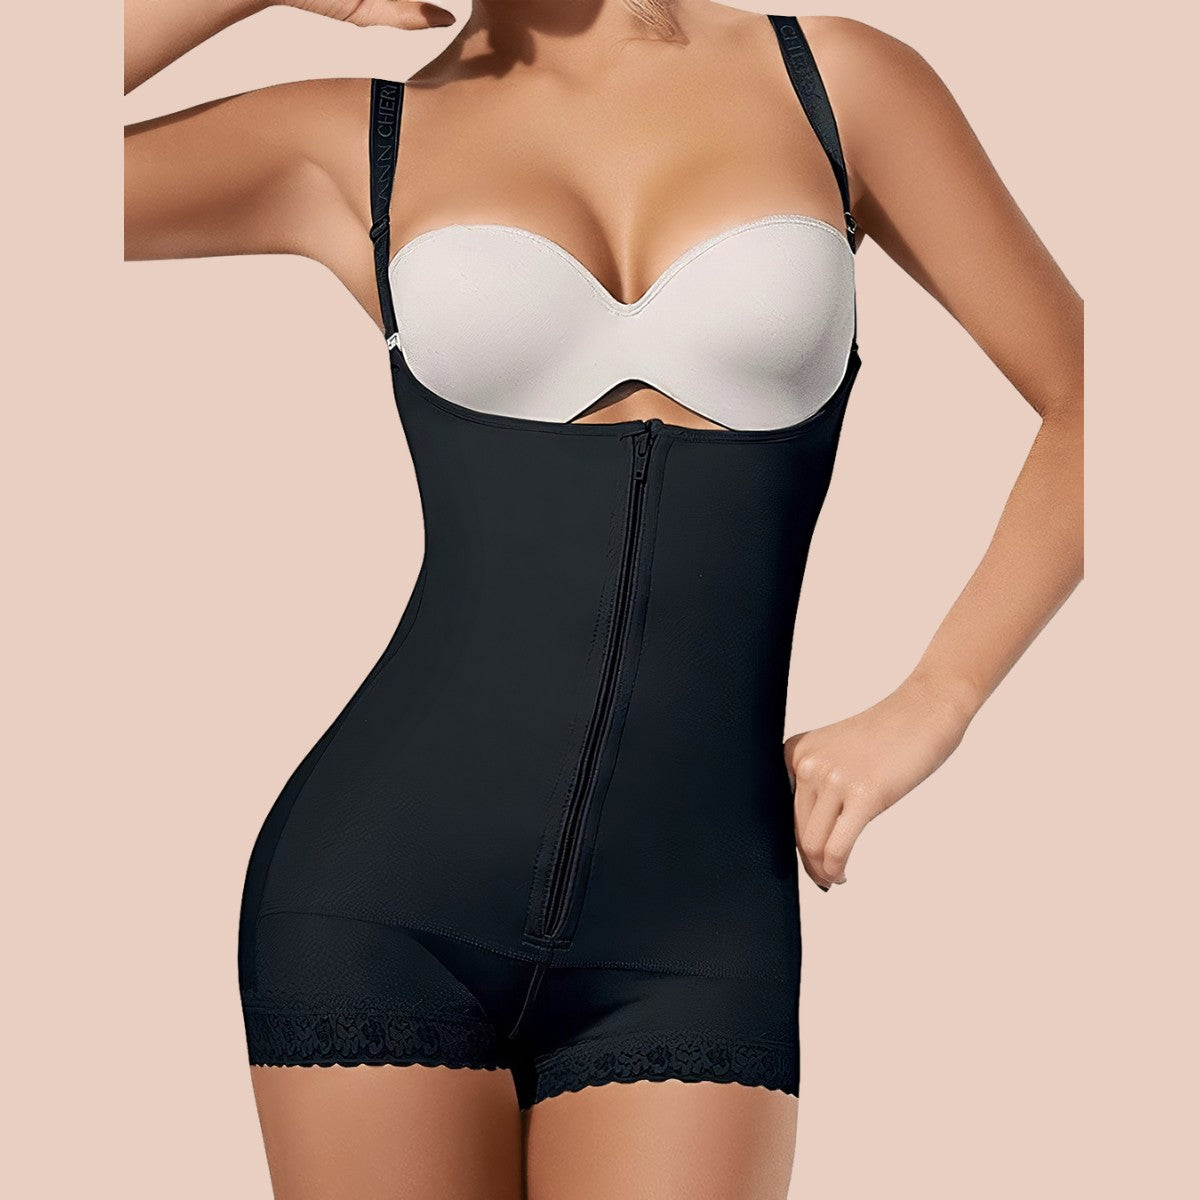 SHAPERX the stretchiest shapewear! 🫶🏽 The second is definitely